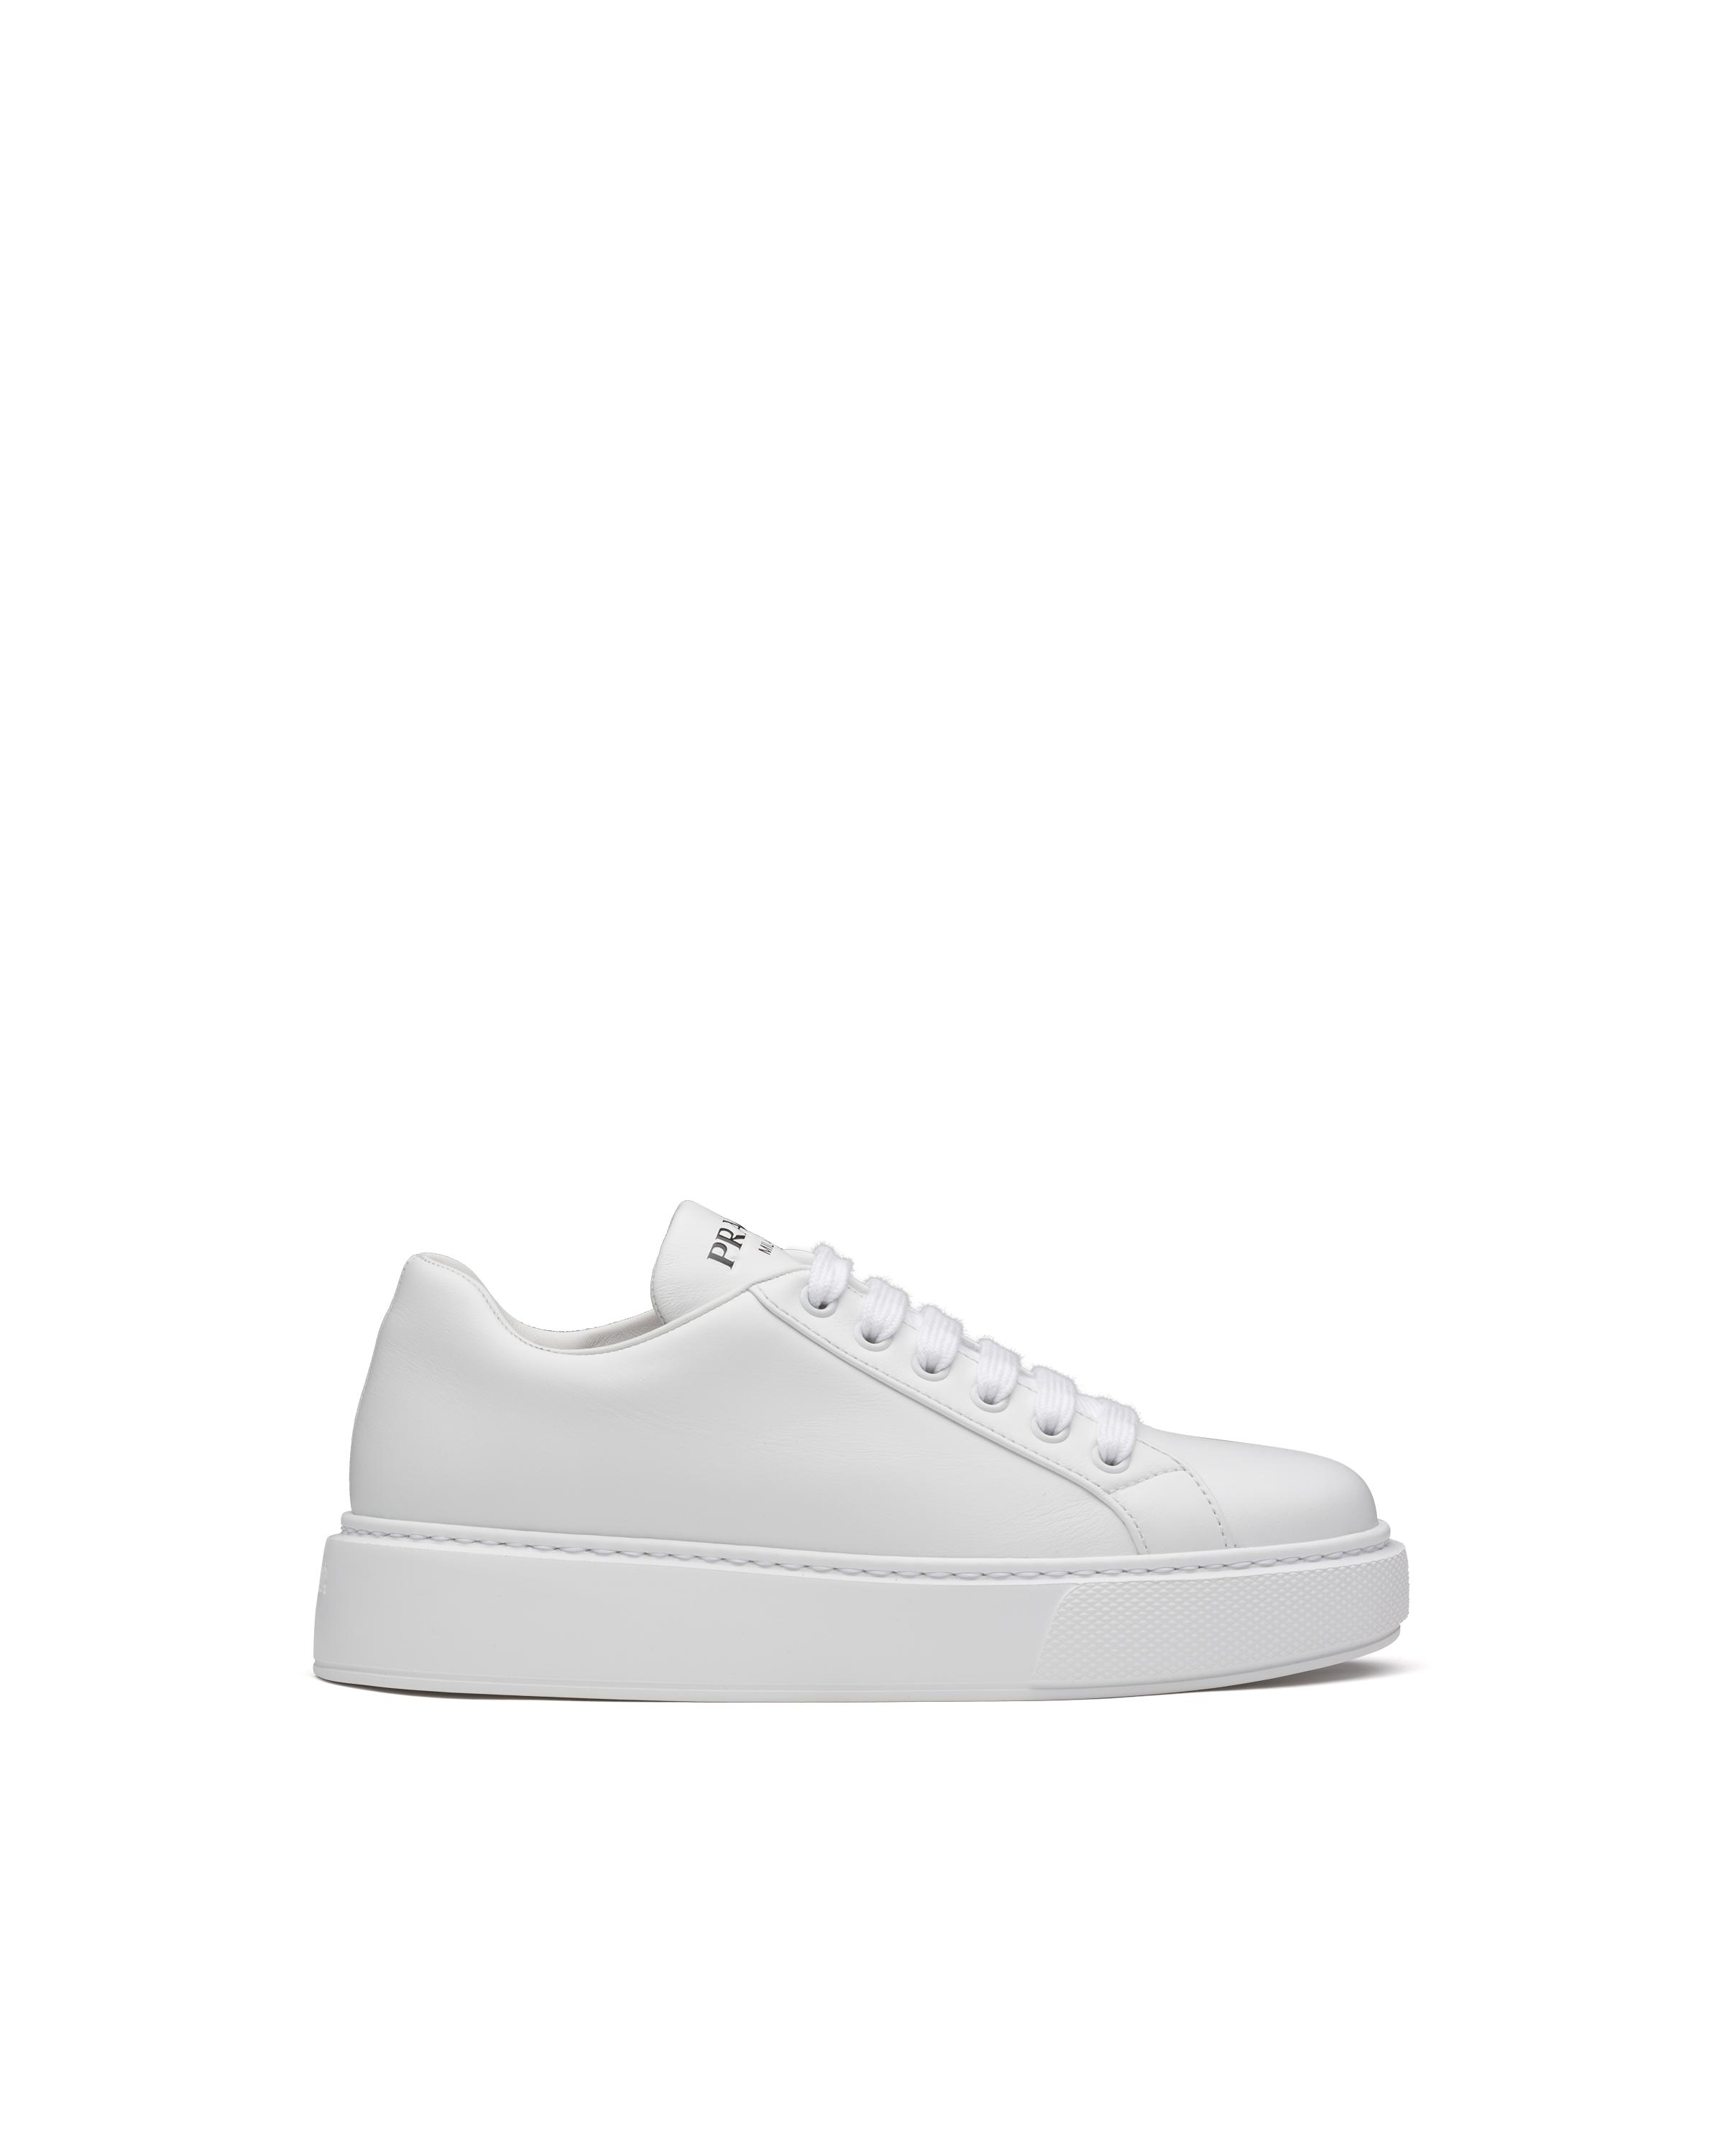 Prada Leather Sneakers in White | Lyst